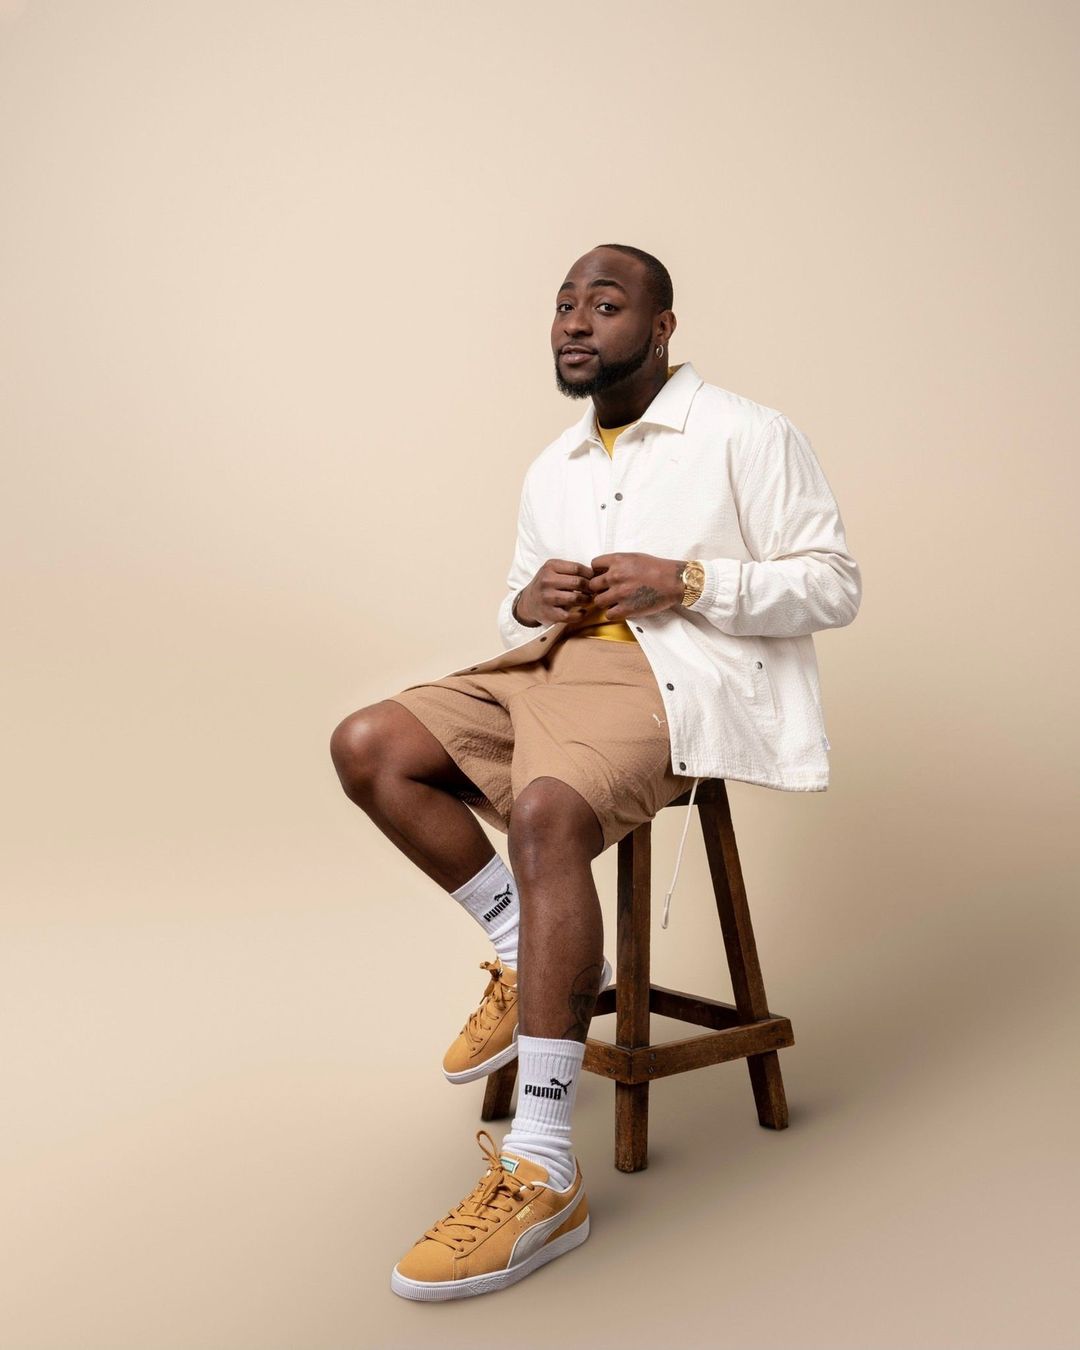 Davido modelling for PUMA's "Bringing back that 80’s sailing style" campaign